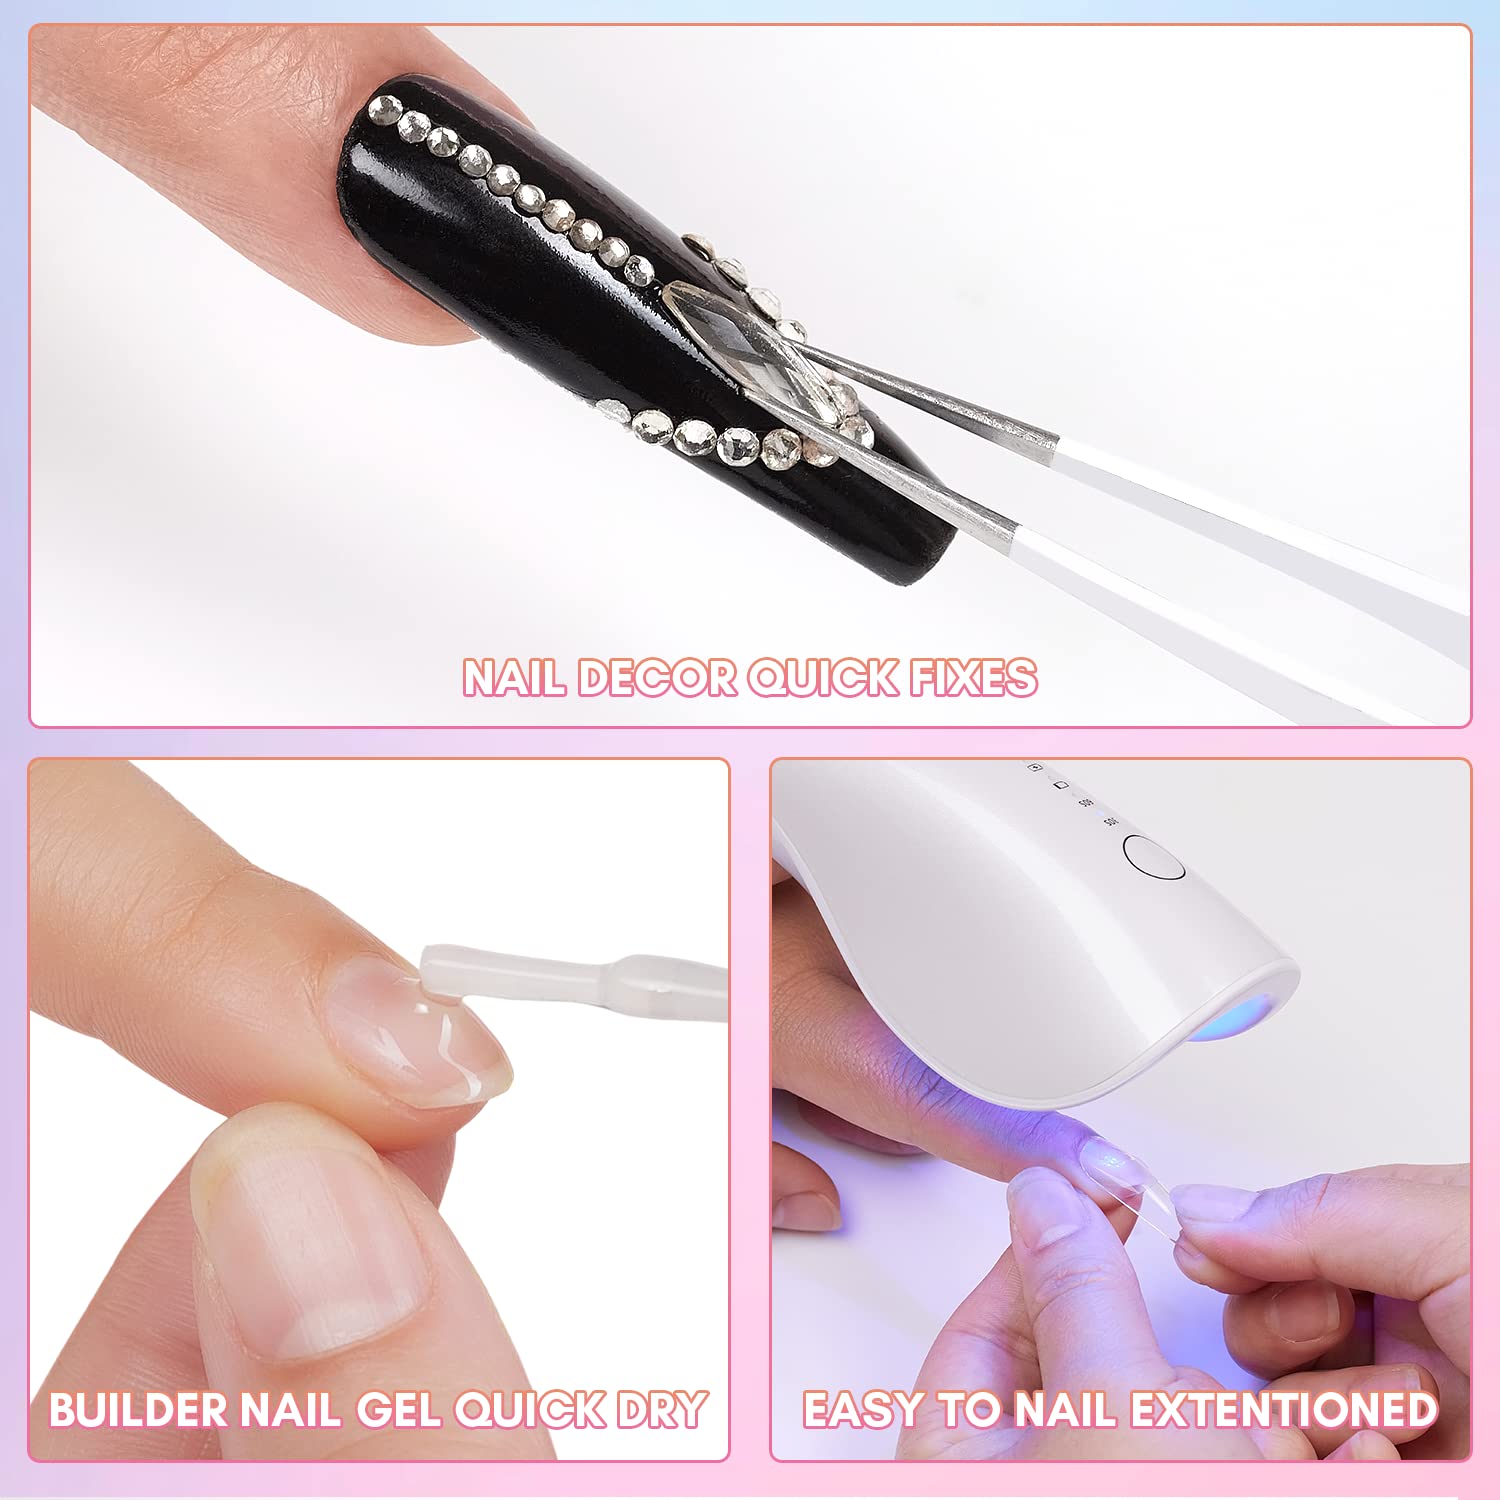 Flash Cure Mini Rechargeable UV Nail Lamp (5W - White)